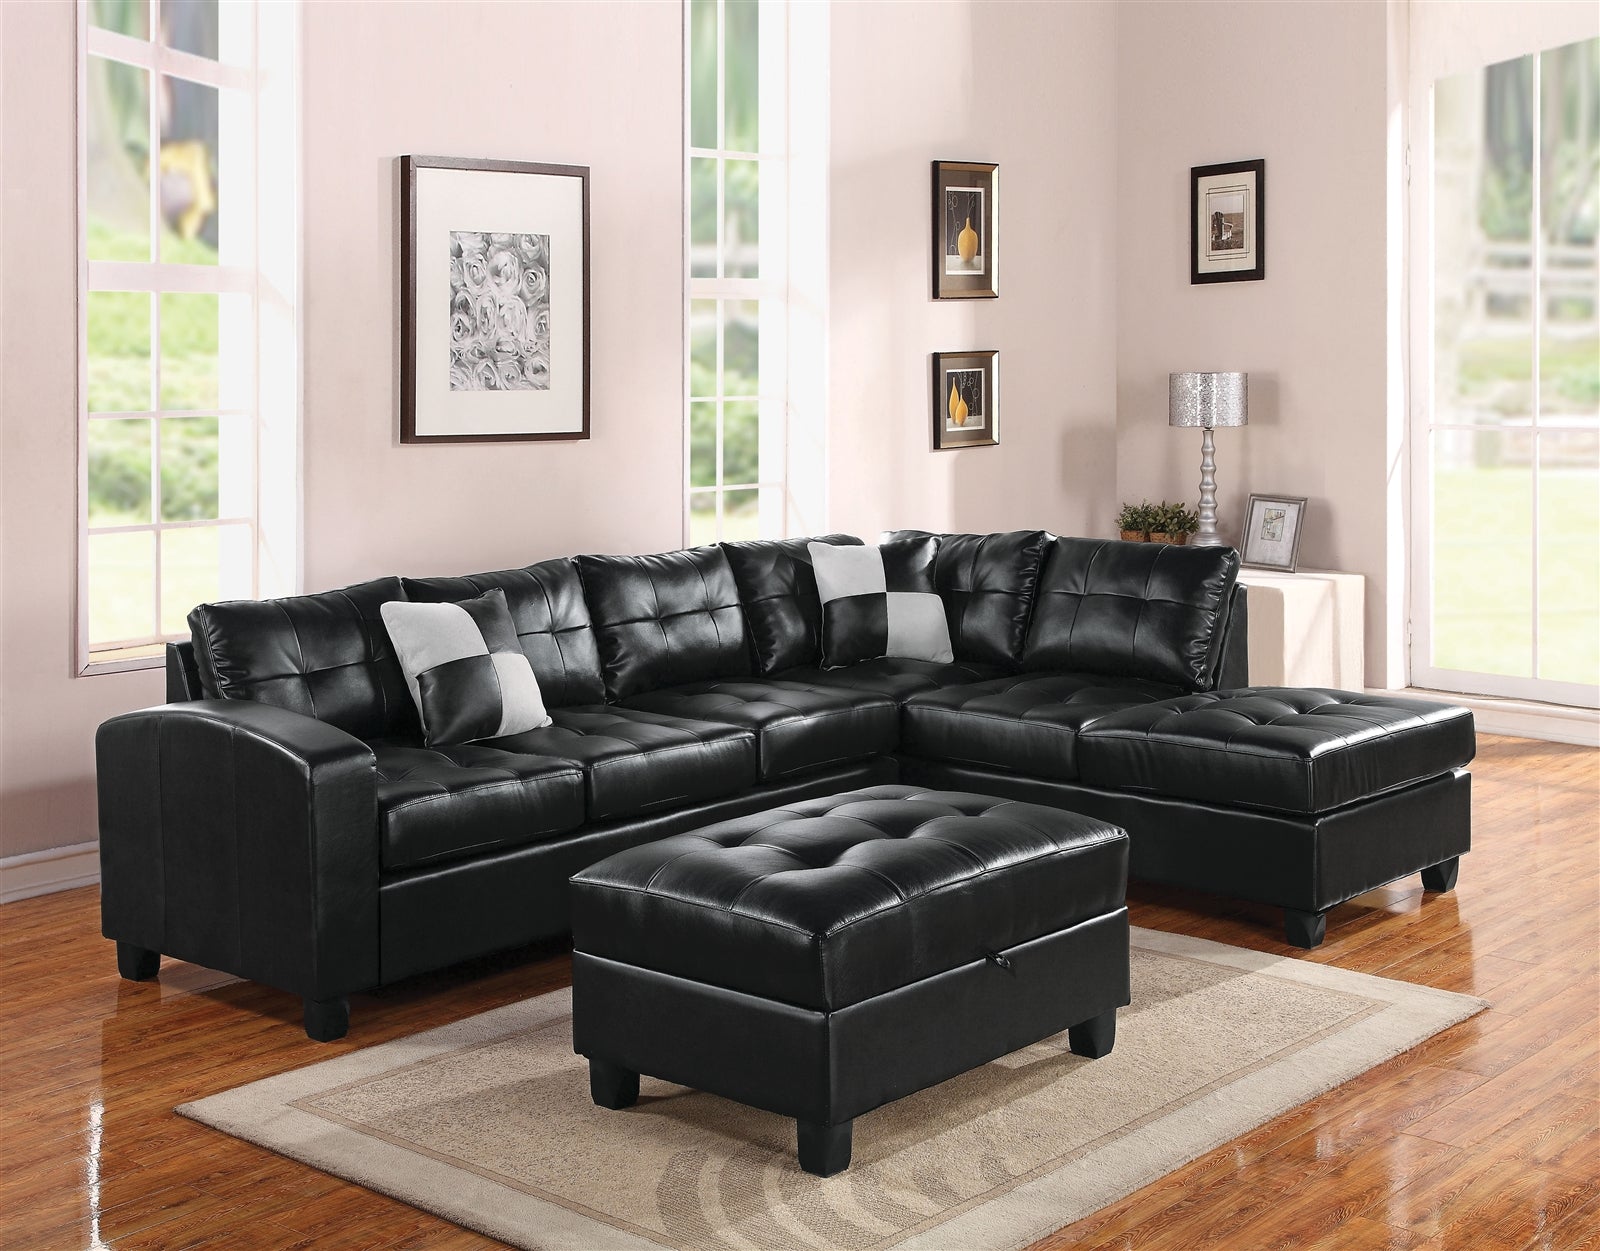 Kiva Contemporary Leather Sectional By